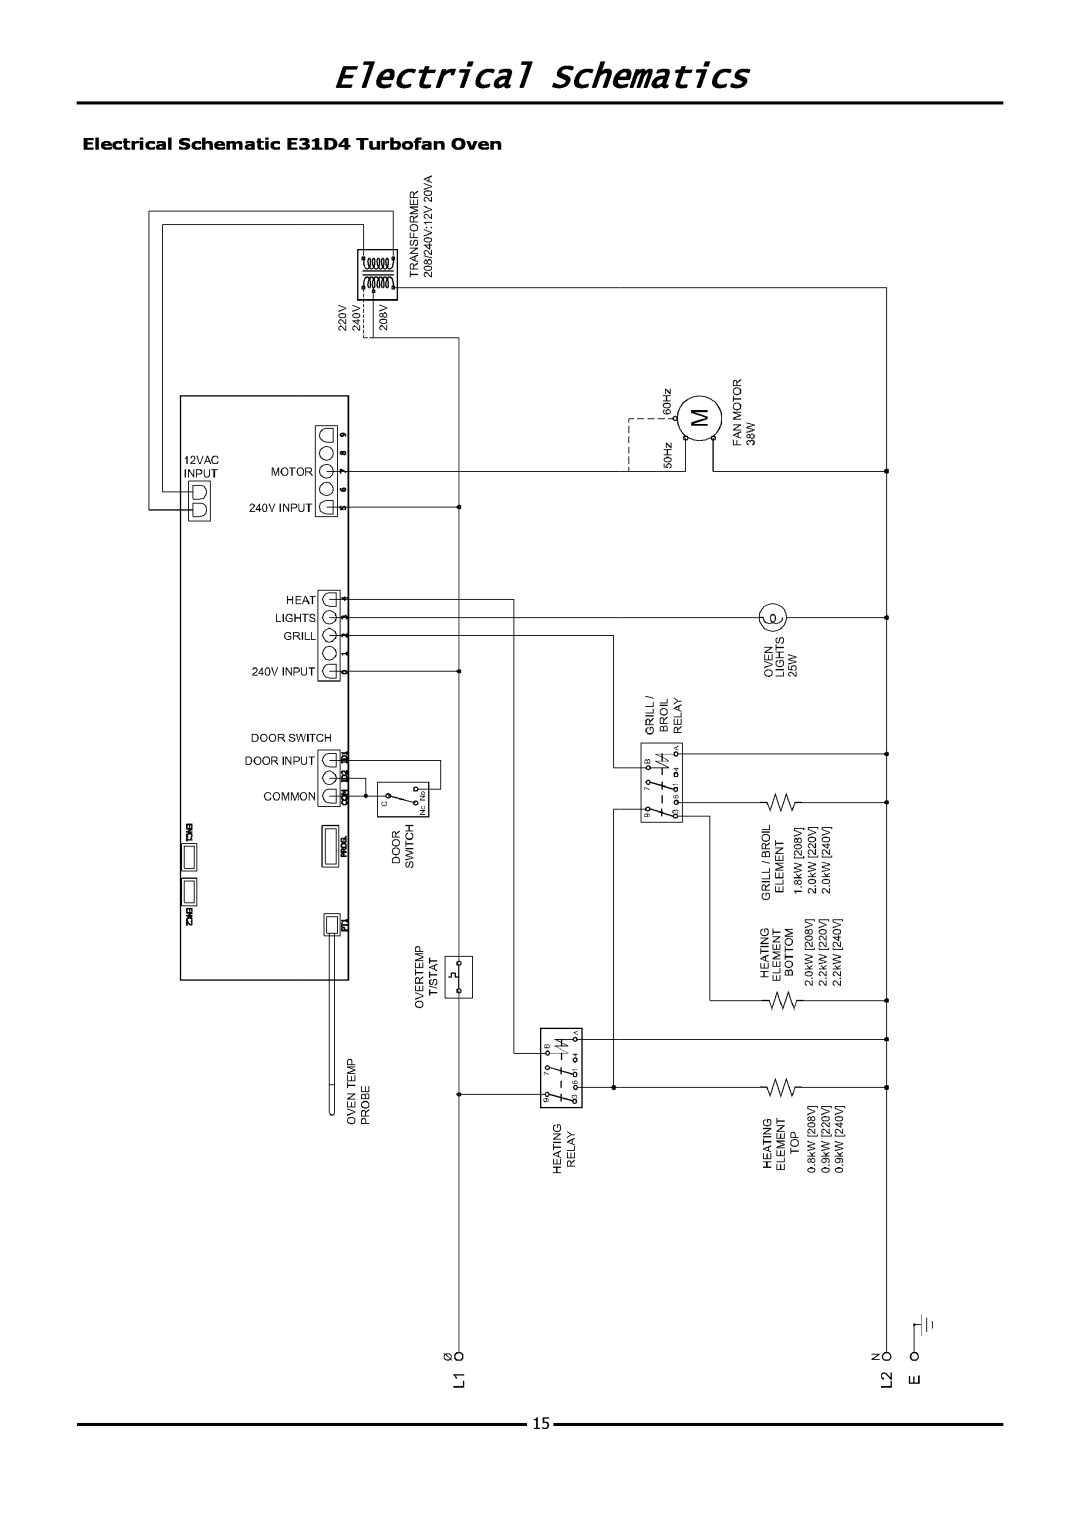 Moffat operation manual Electrical Schematics, Electrical Schematic E31D4 Turbofan Oven 